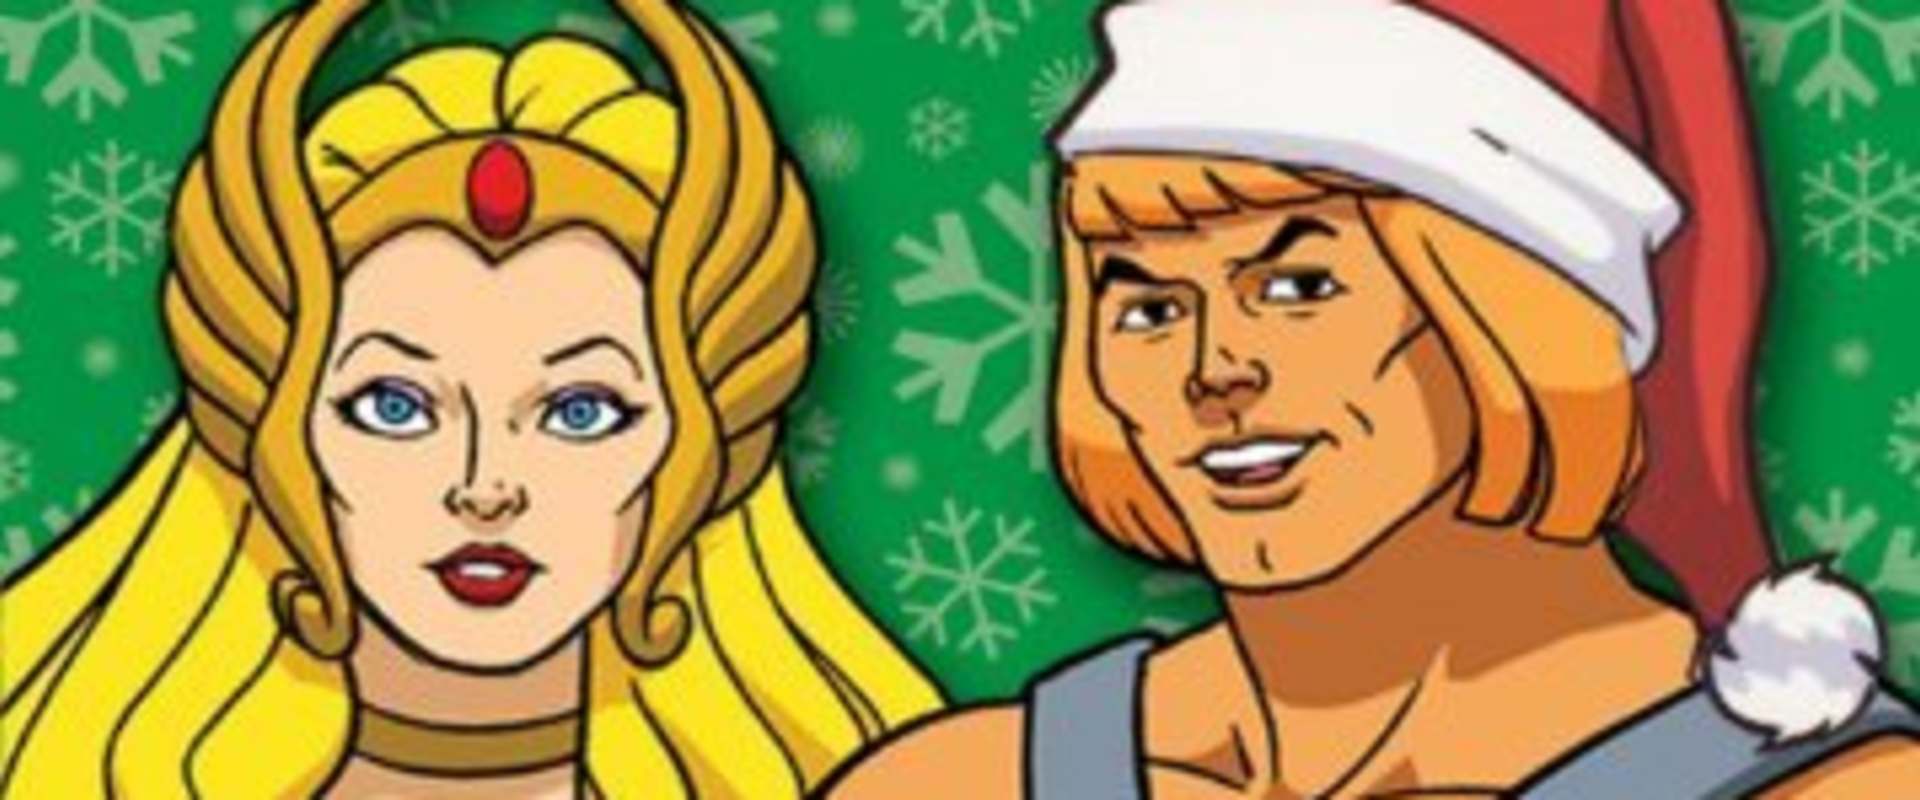 He-Man and She-Ra: A Christmas Special background 1